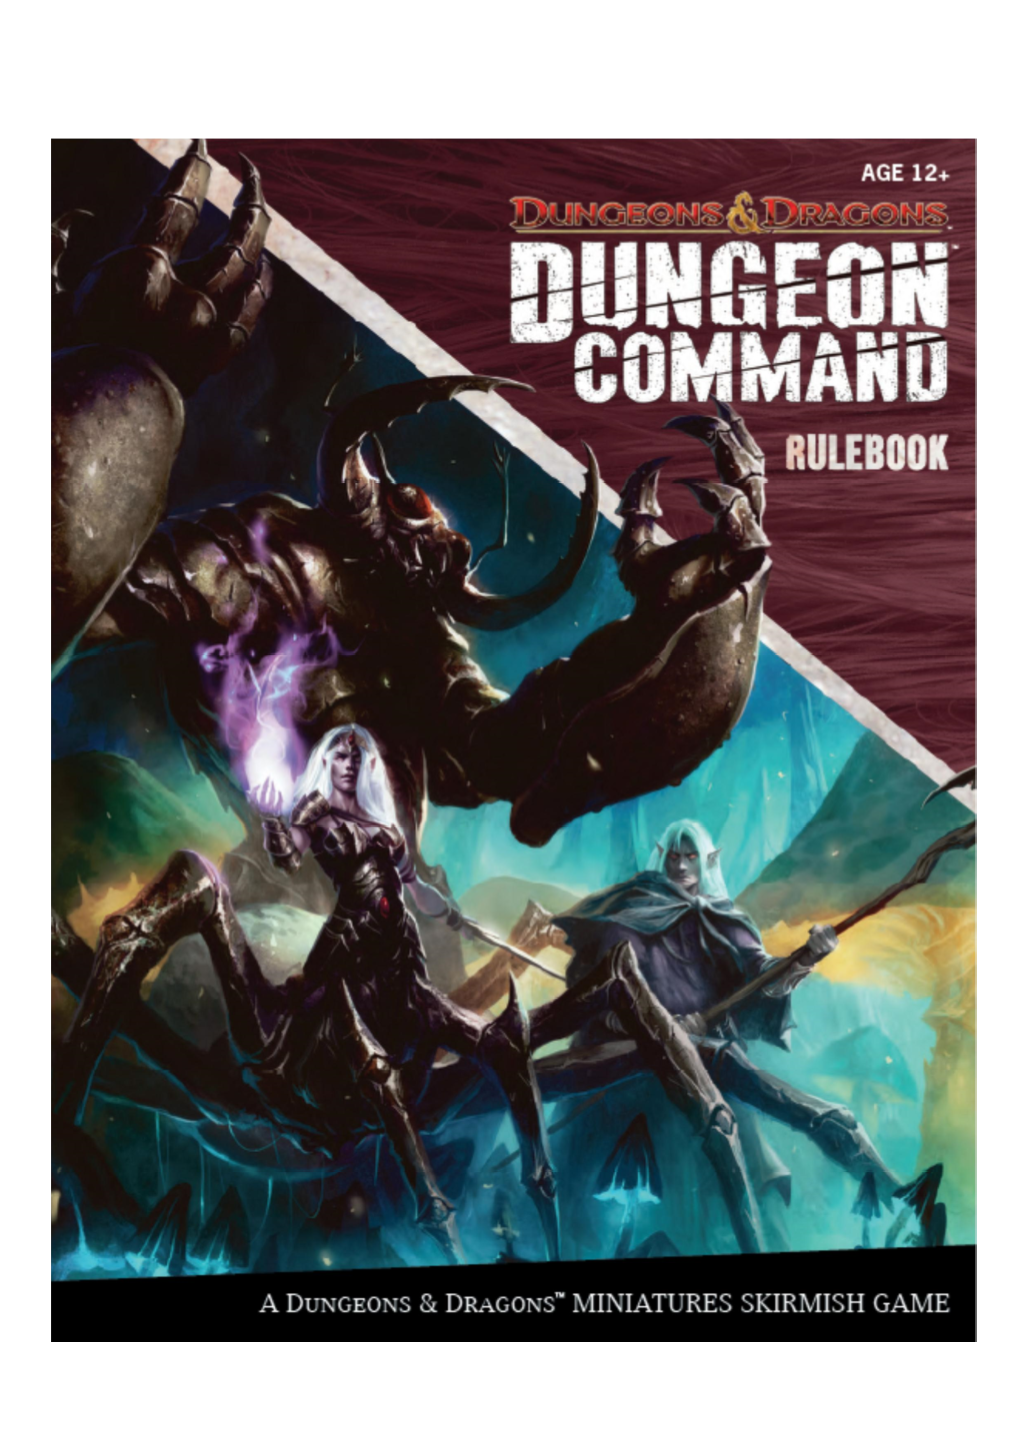 Dungeon Command.Pdf